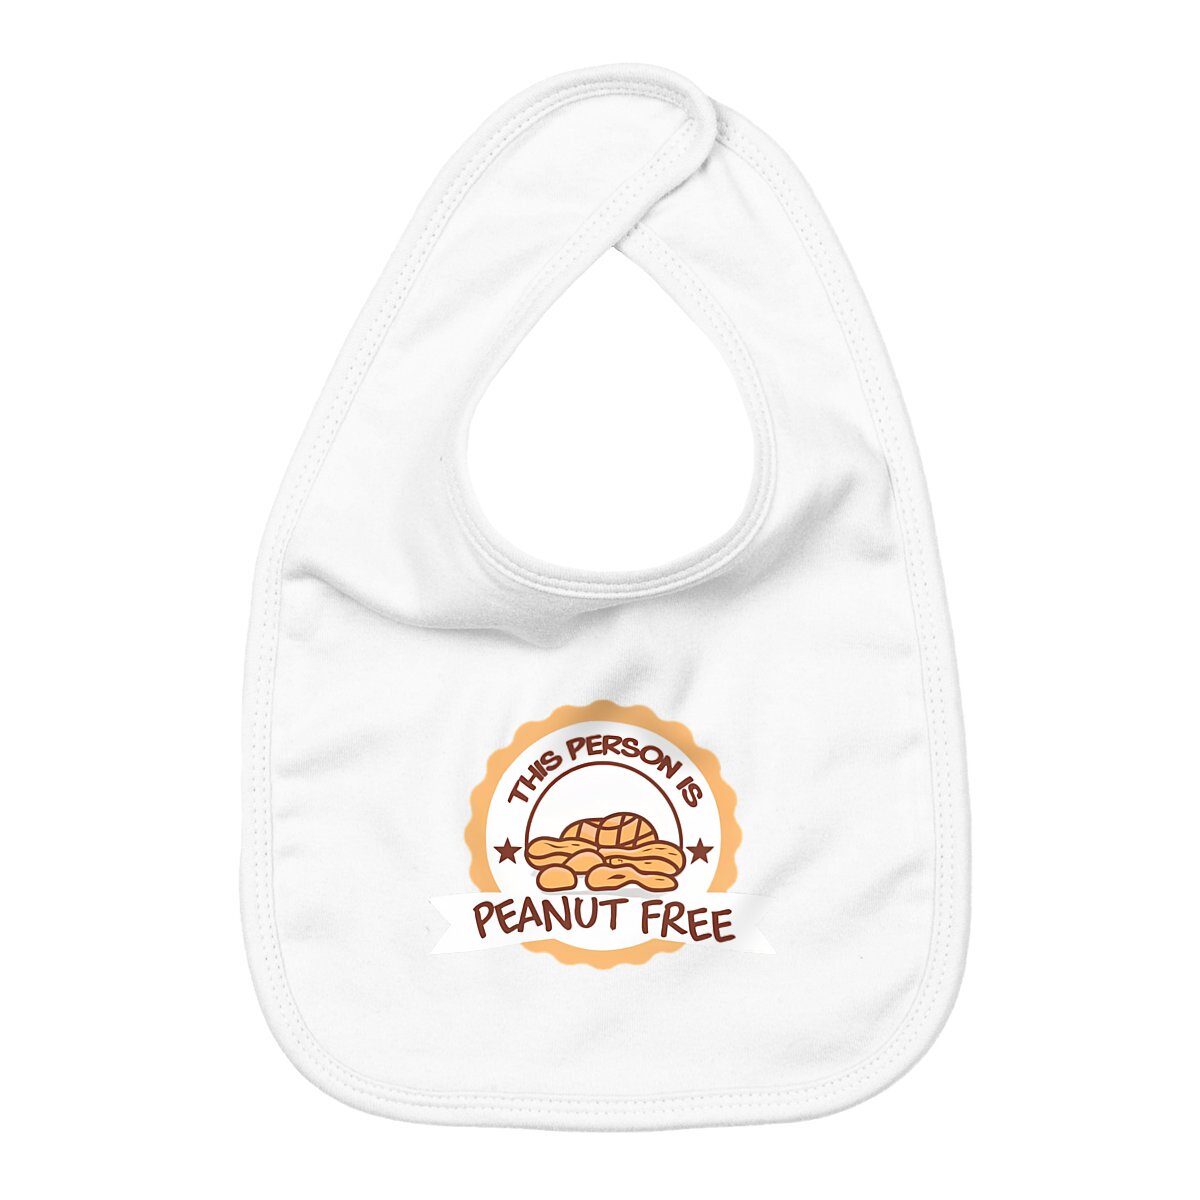 This Person Is Peanut Free Organic Cotton Graphic Baby Bib | Hypoallergenic - Allergy Friendly - Naturally Free